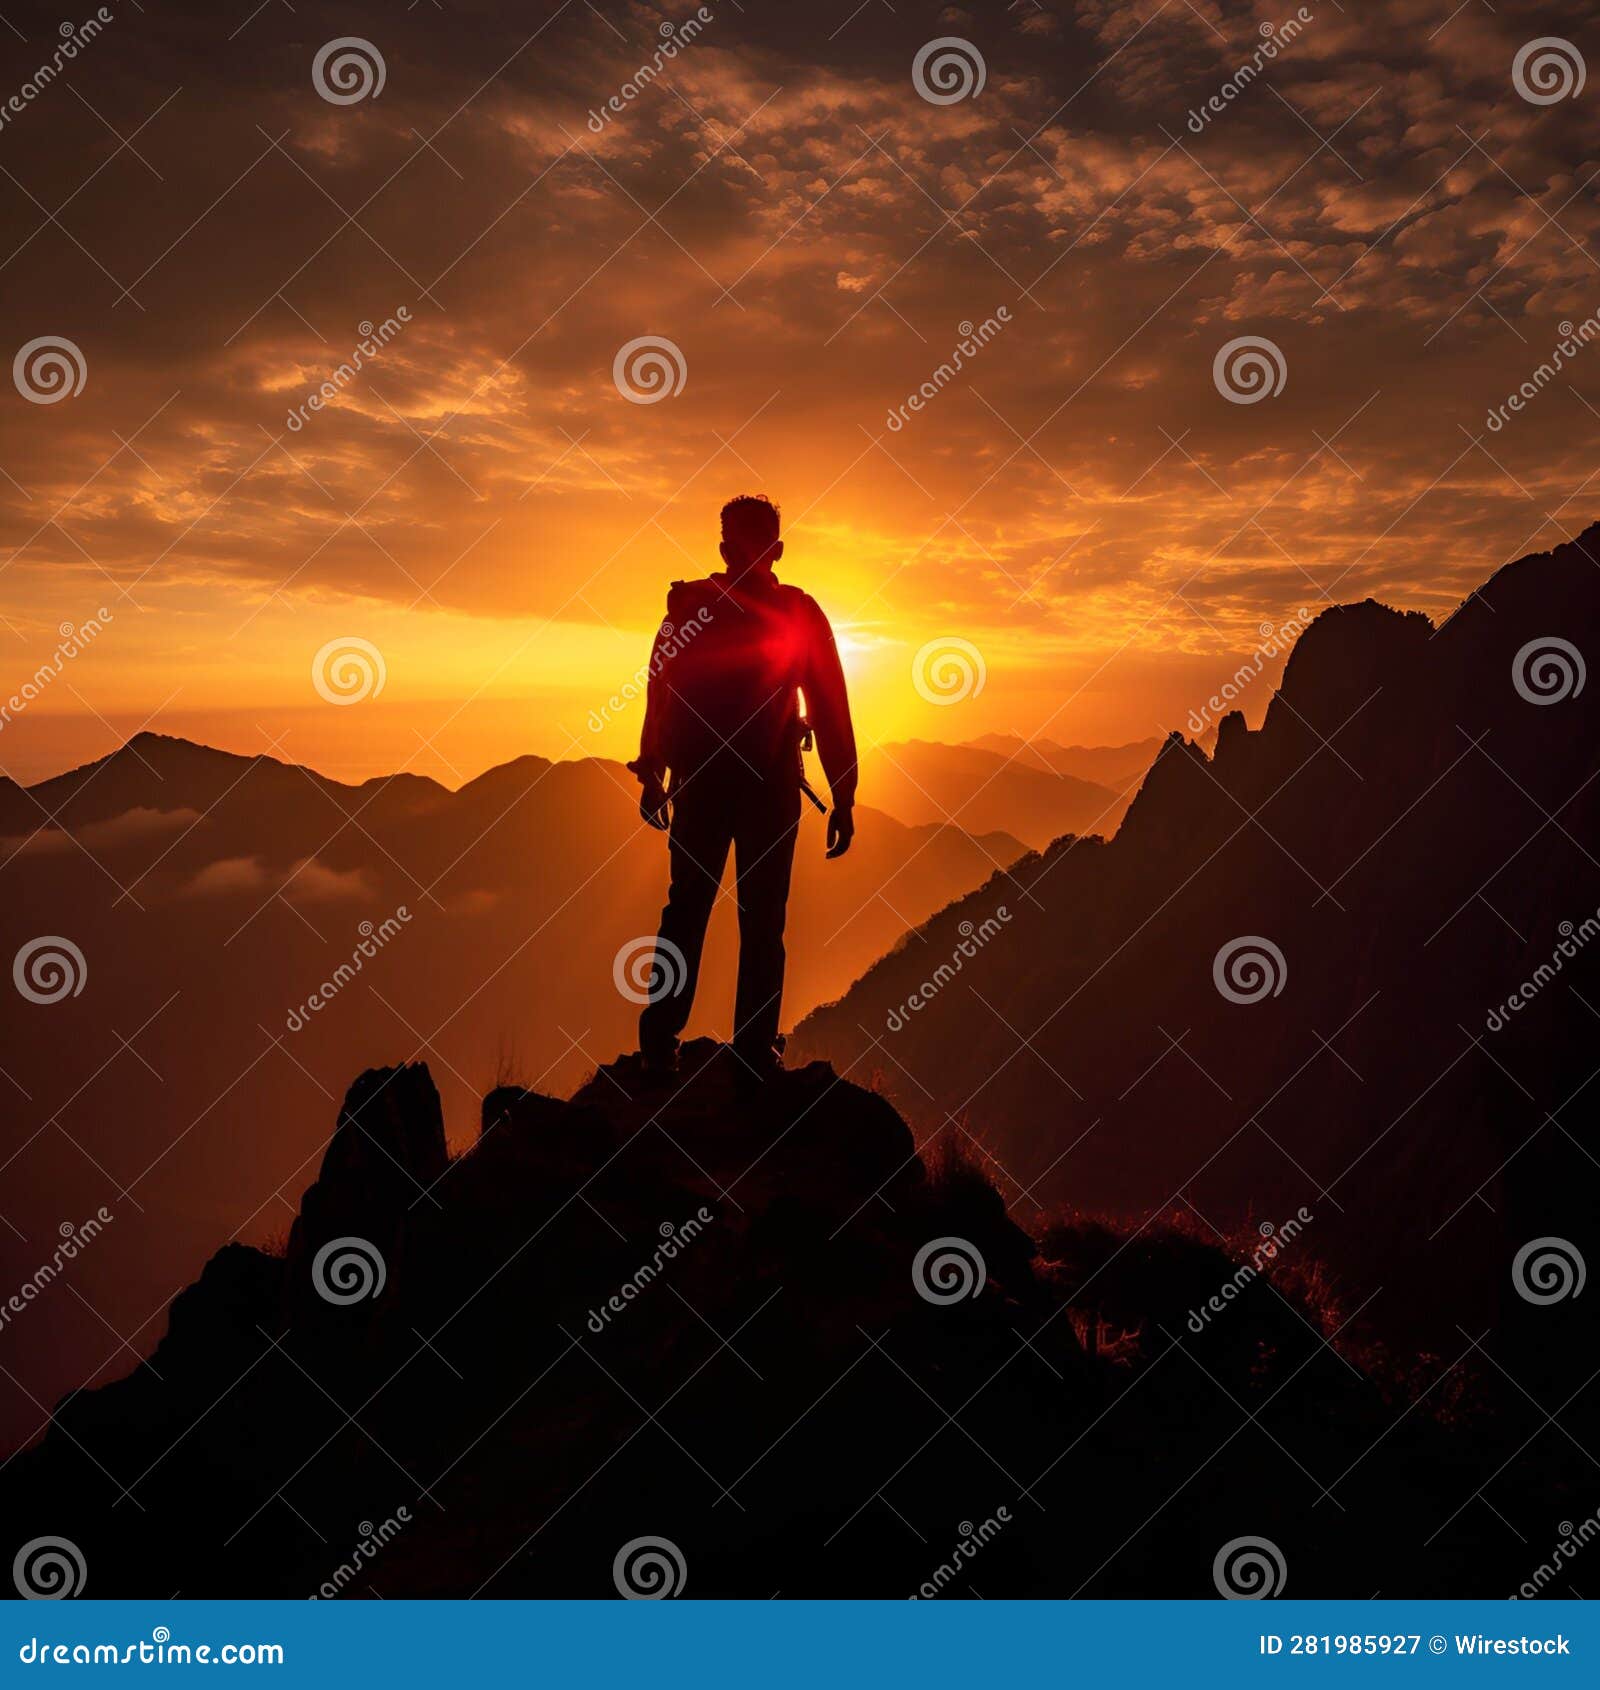 The Sun Setting on a Person with Their Back To Camera Stock Image ...